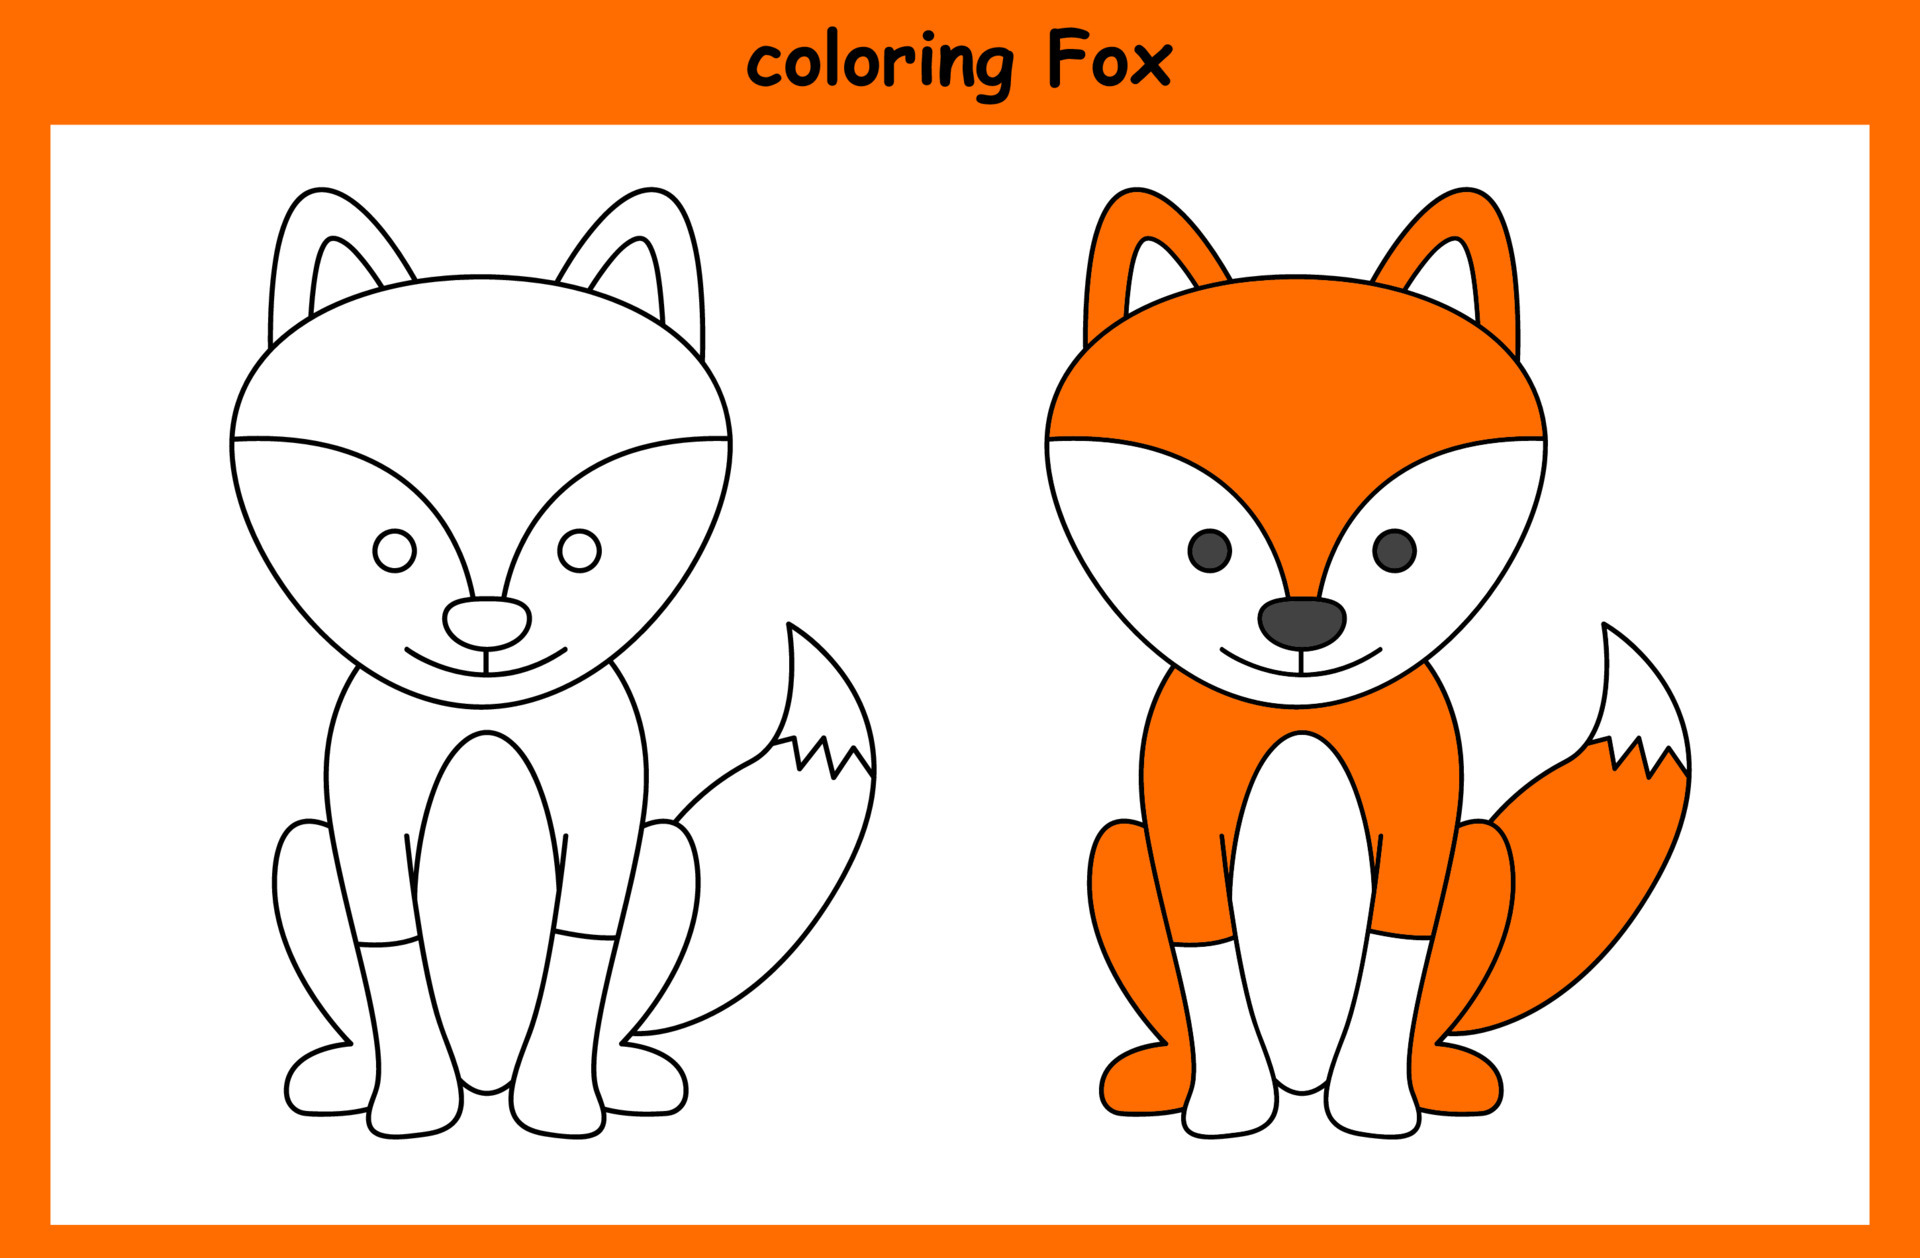 Child's drawing of a fox